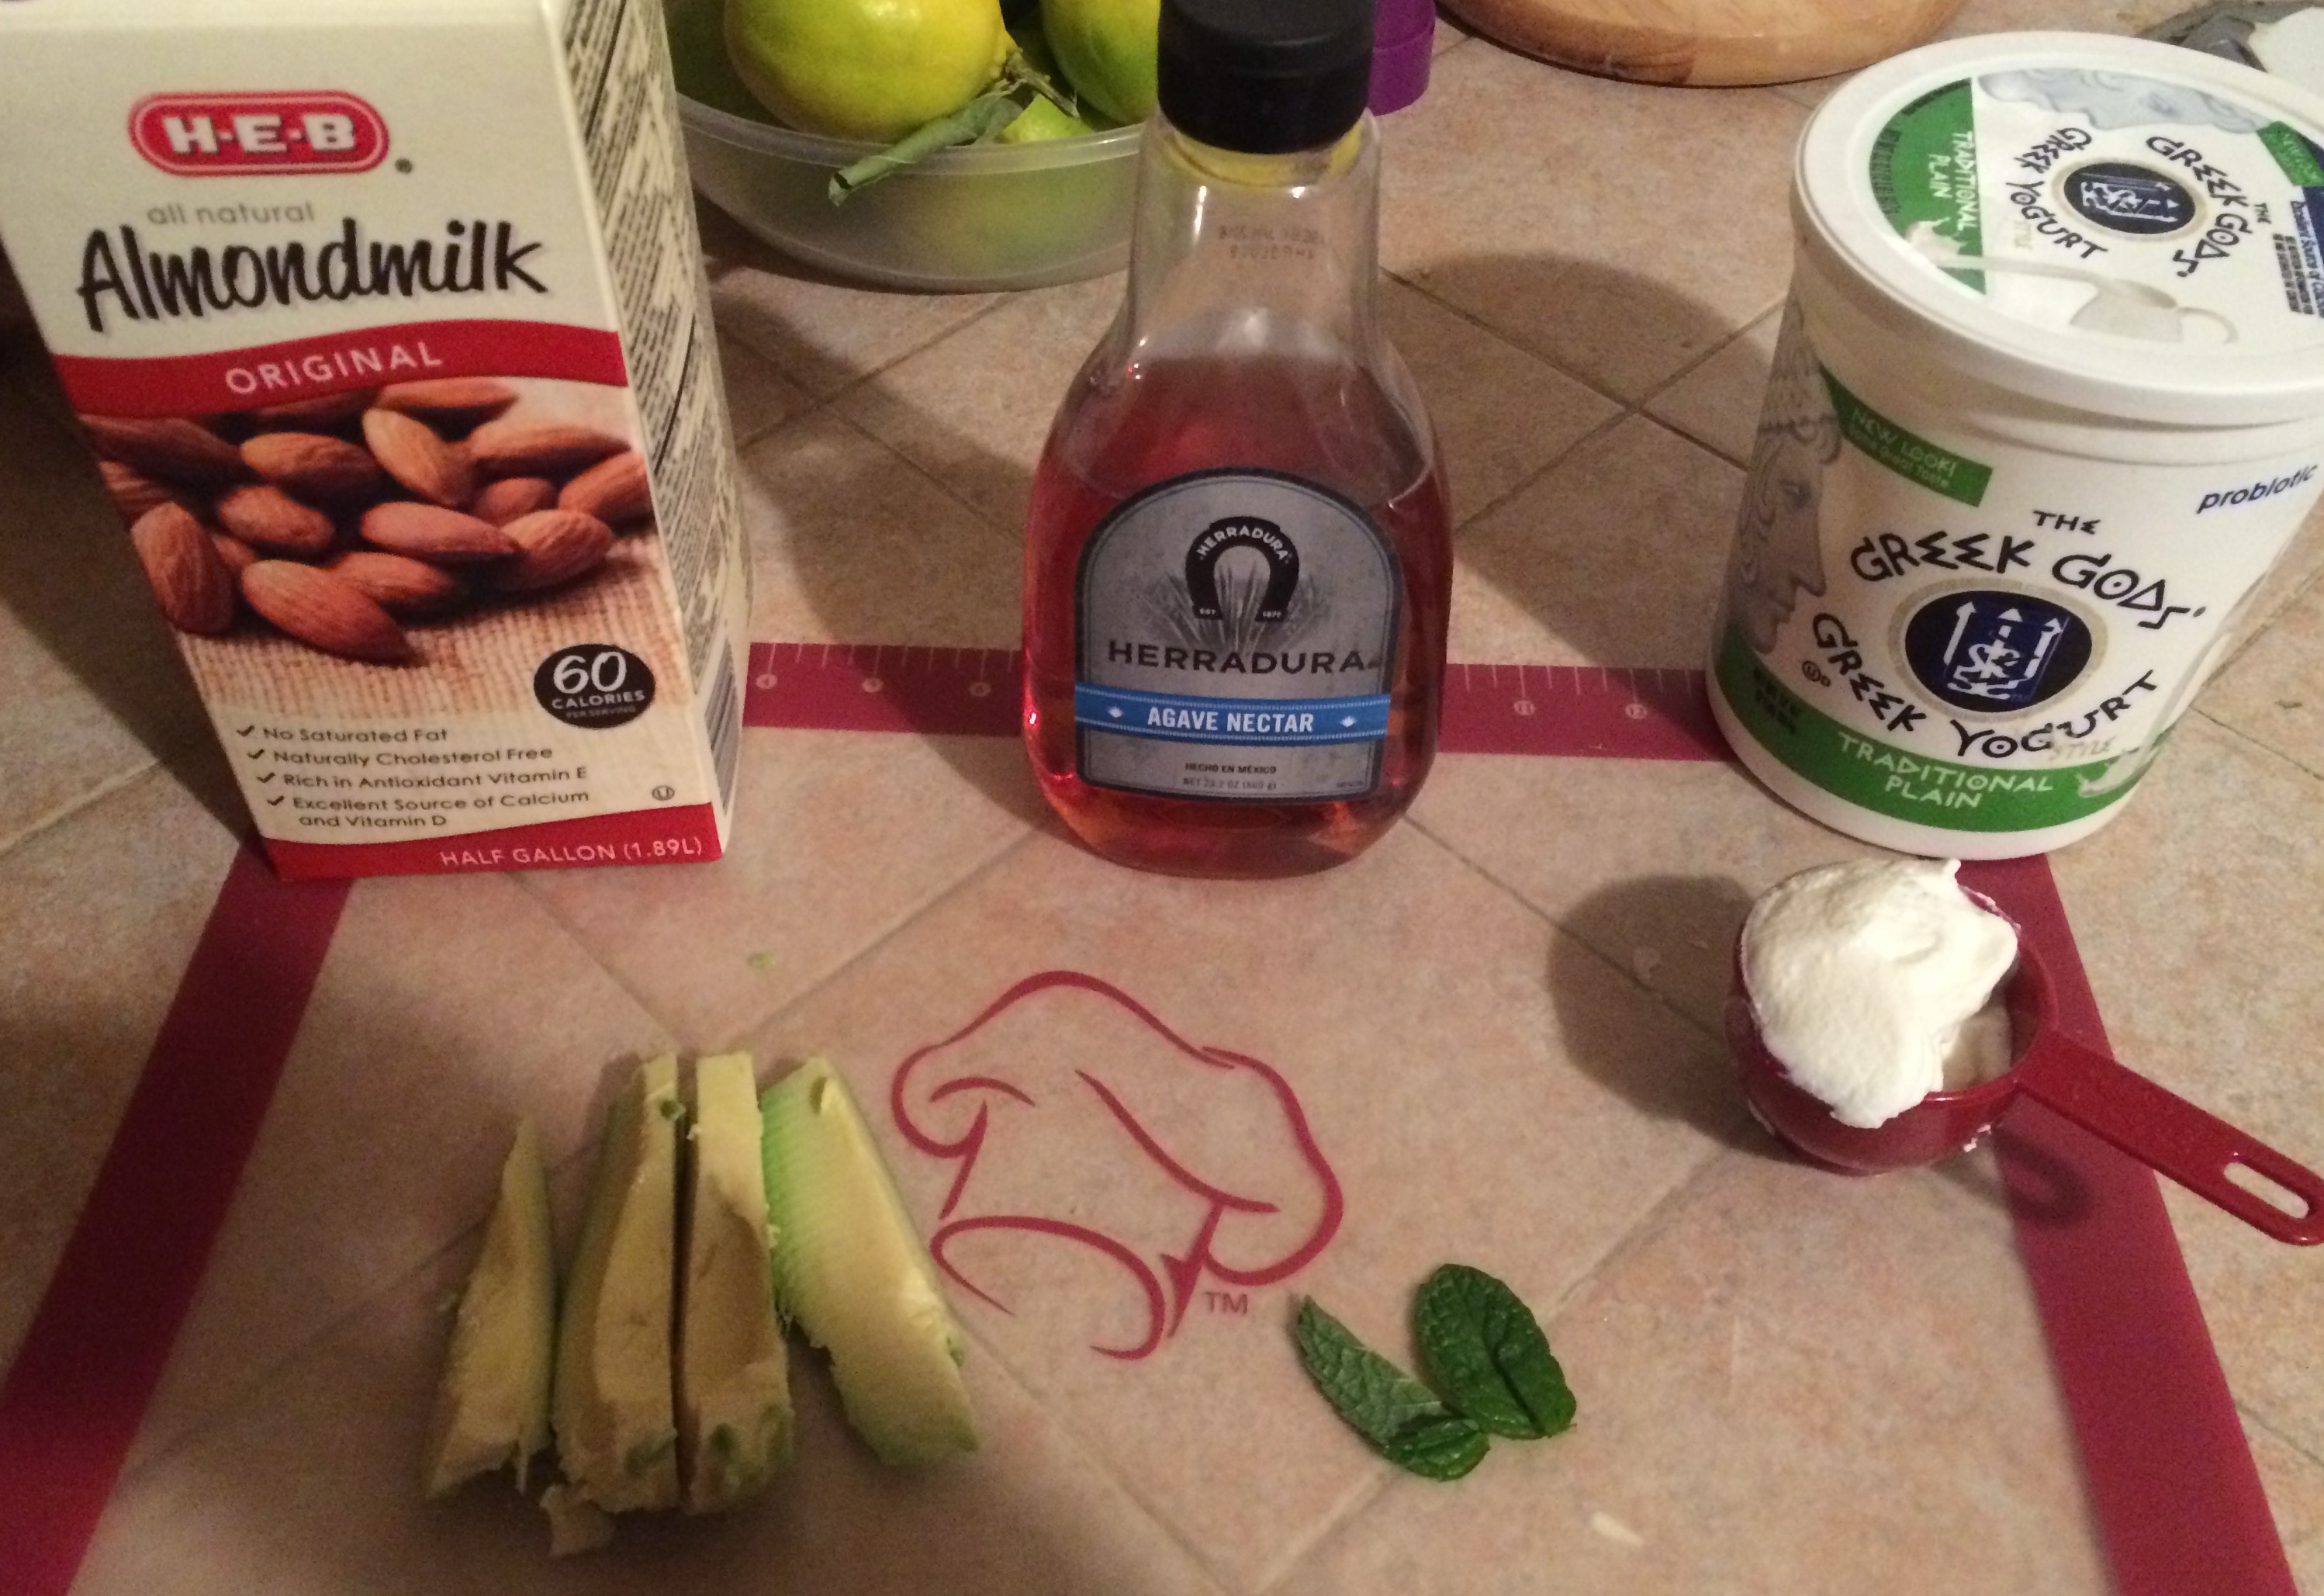 The ingredients here are avocado, yogurt, almond milk, mint, and agave nectar.